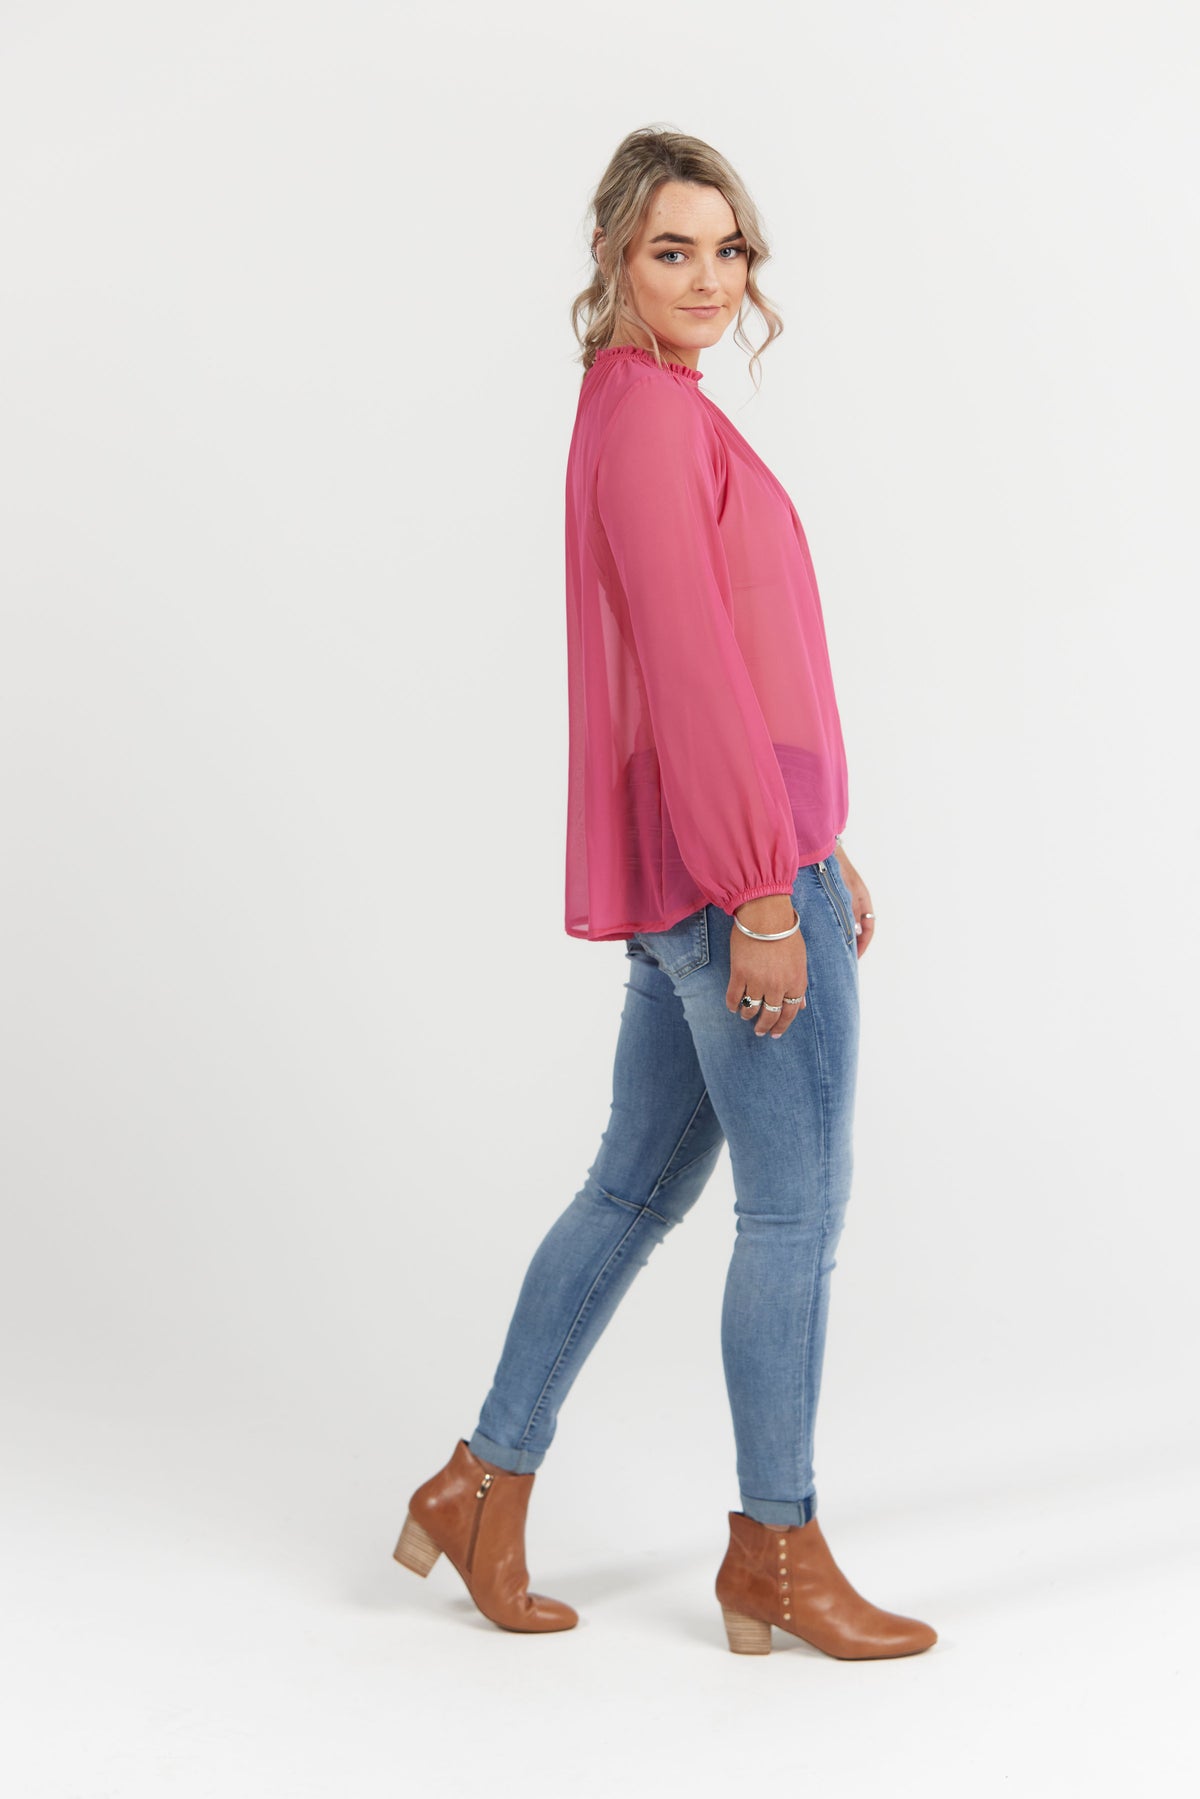 Daisy Top Lolli Pink